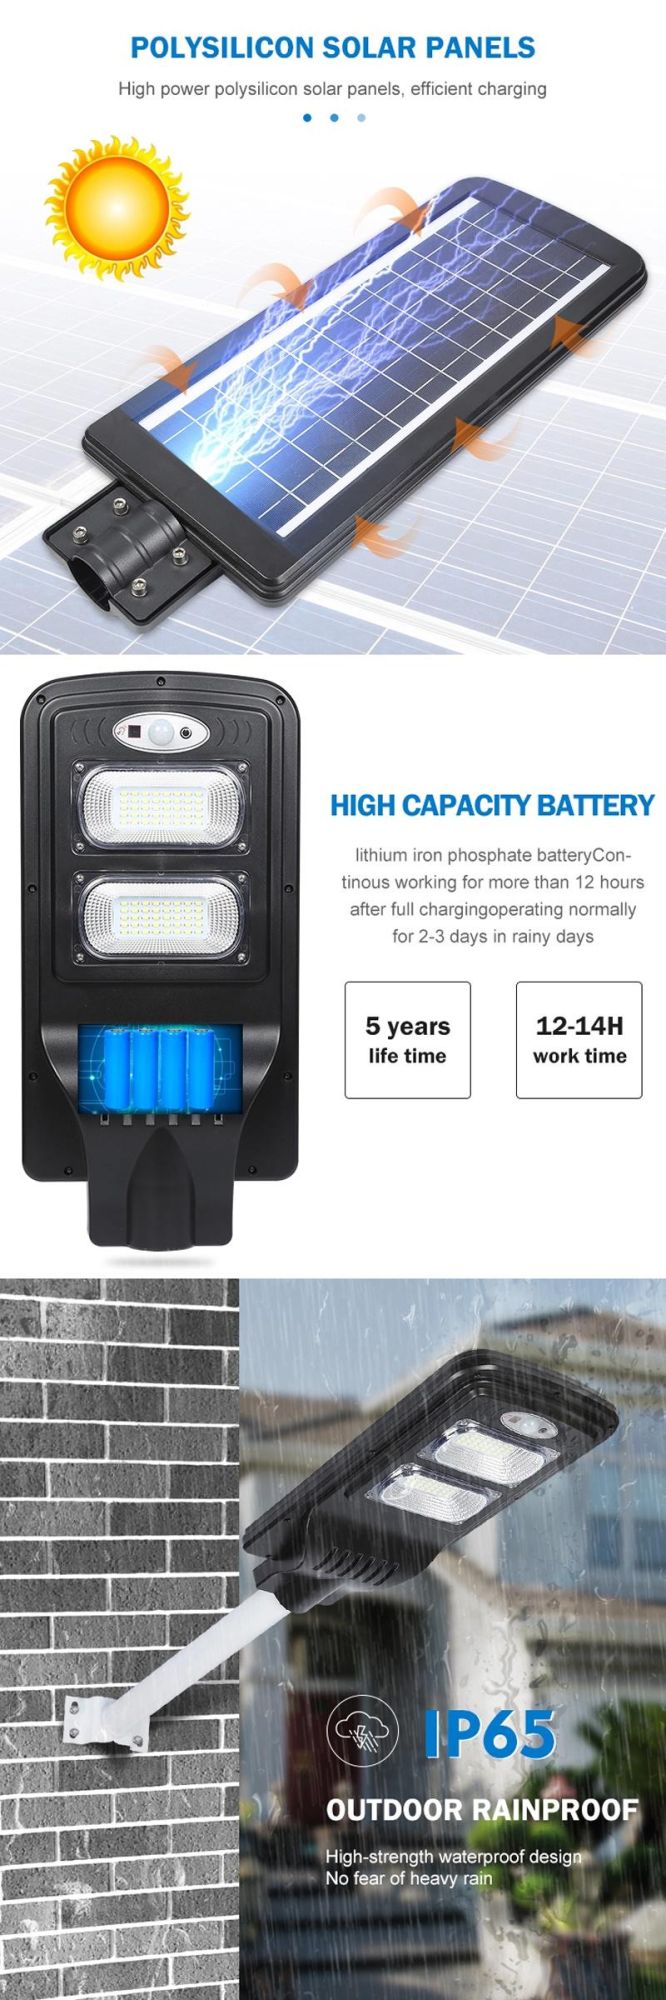 20W Remote Time Control Light-Operated with Motion Sensor IP65 Waterproof All in One Solar LED Street Lights, 40W 60W 80W Energy Saving Power System Home Light